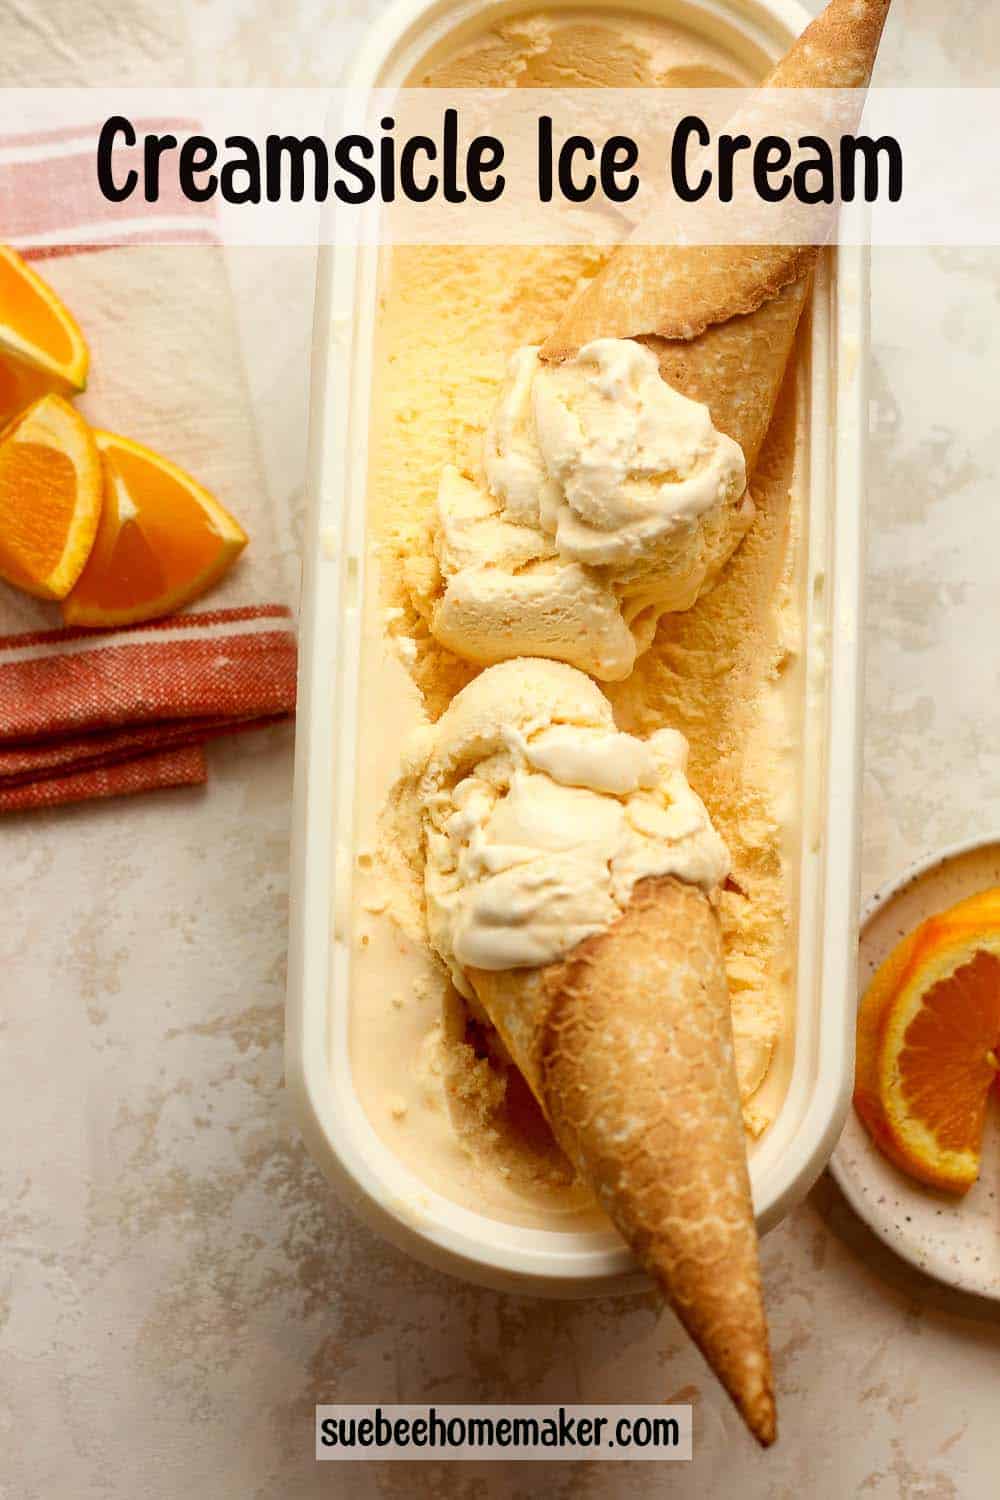 An oblong container of creamsicle ice cream with two ice cream cones inside.